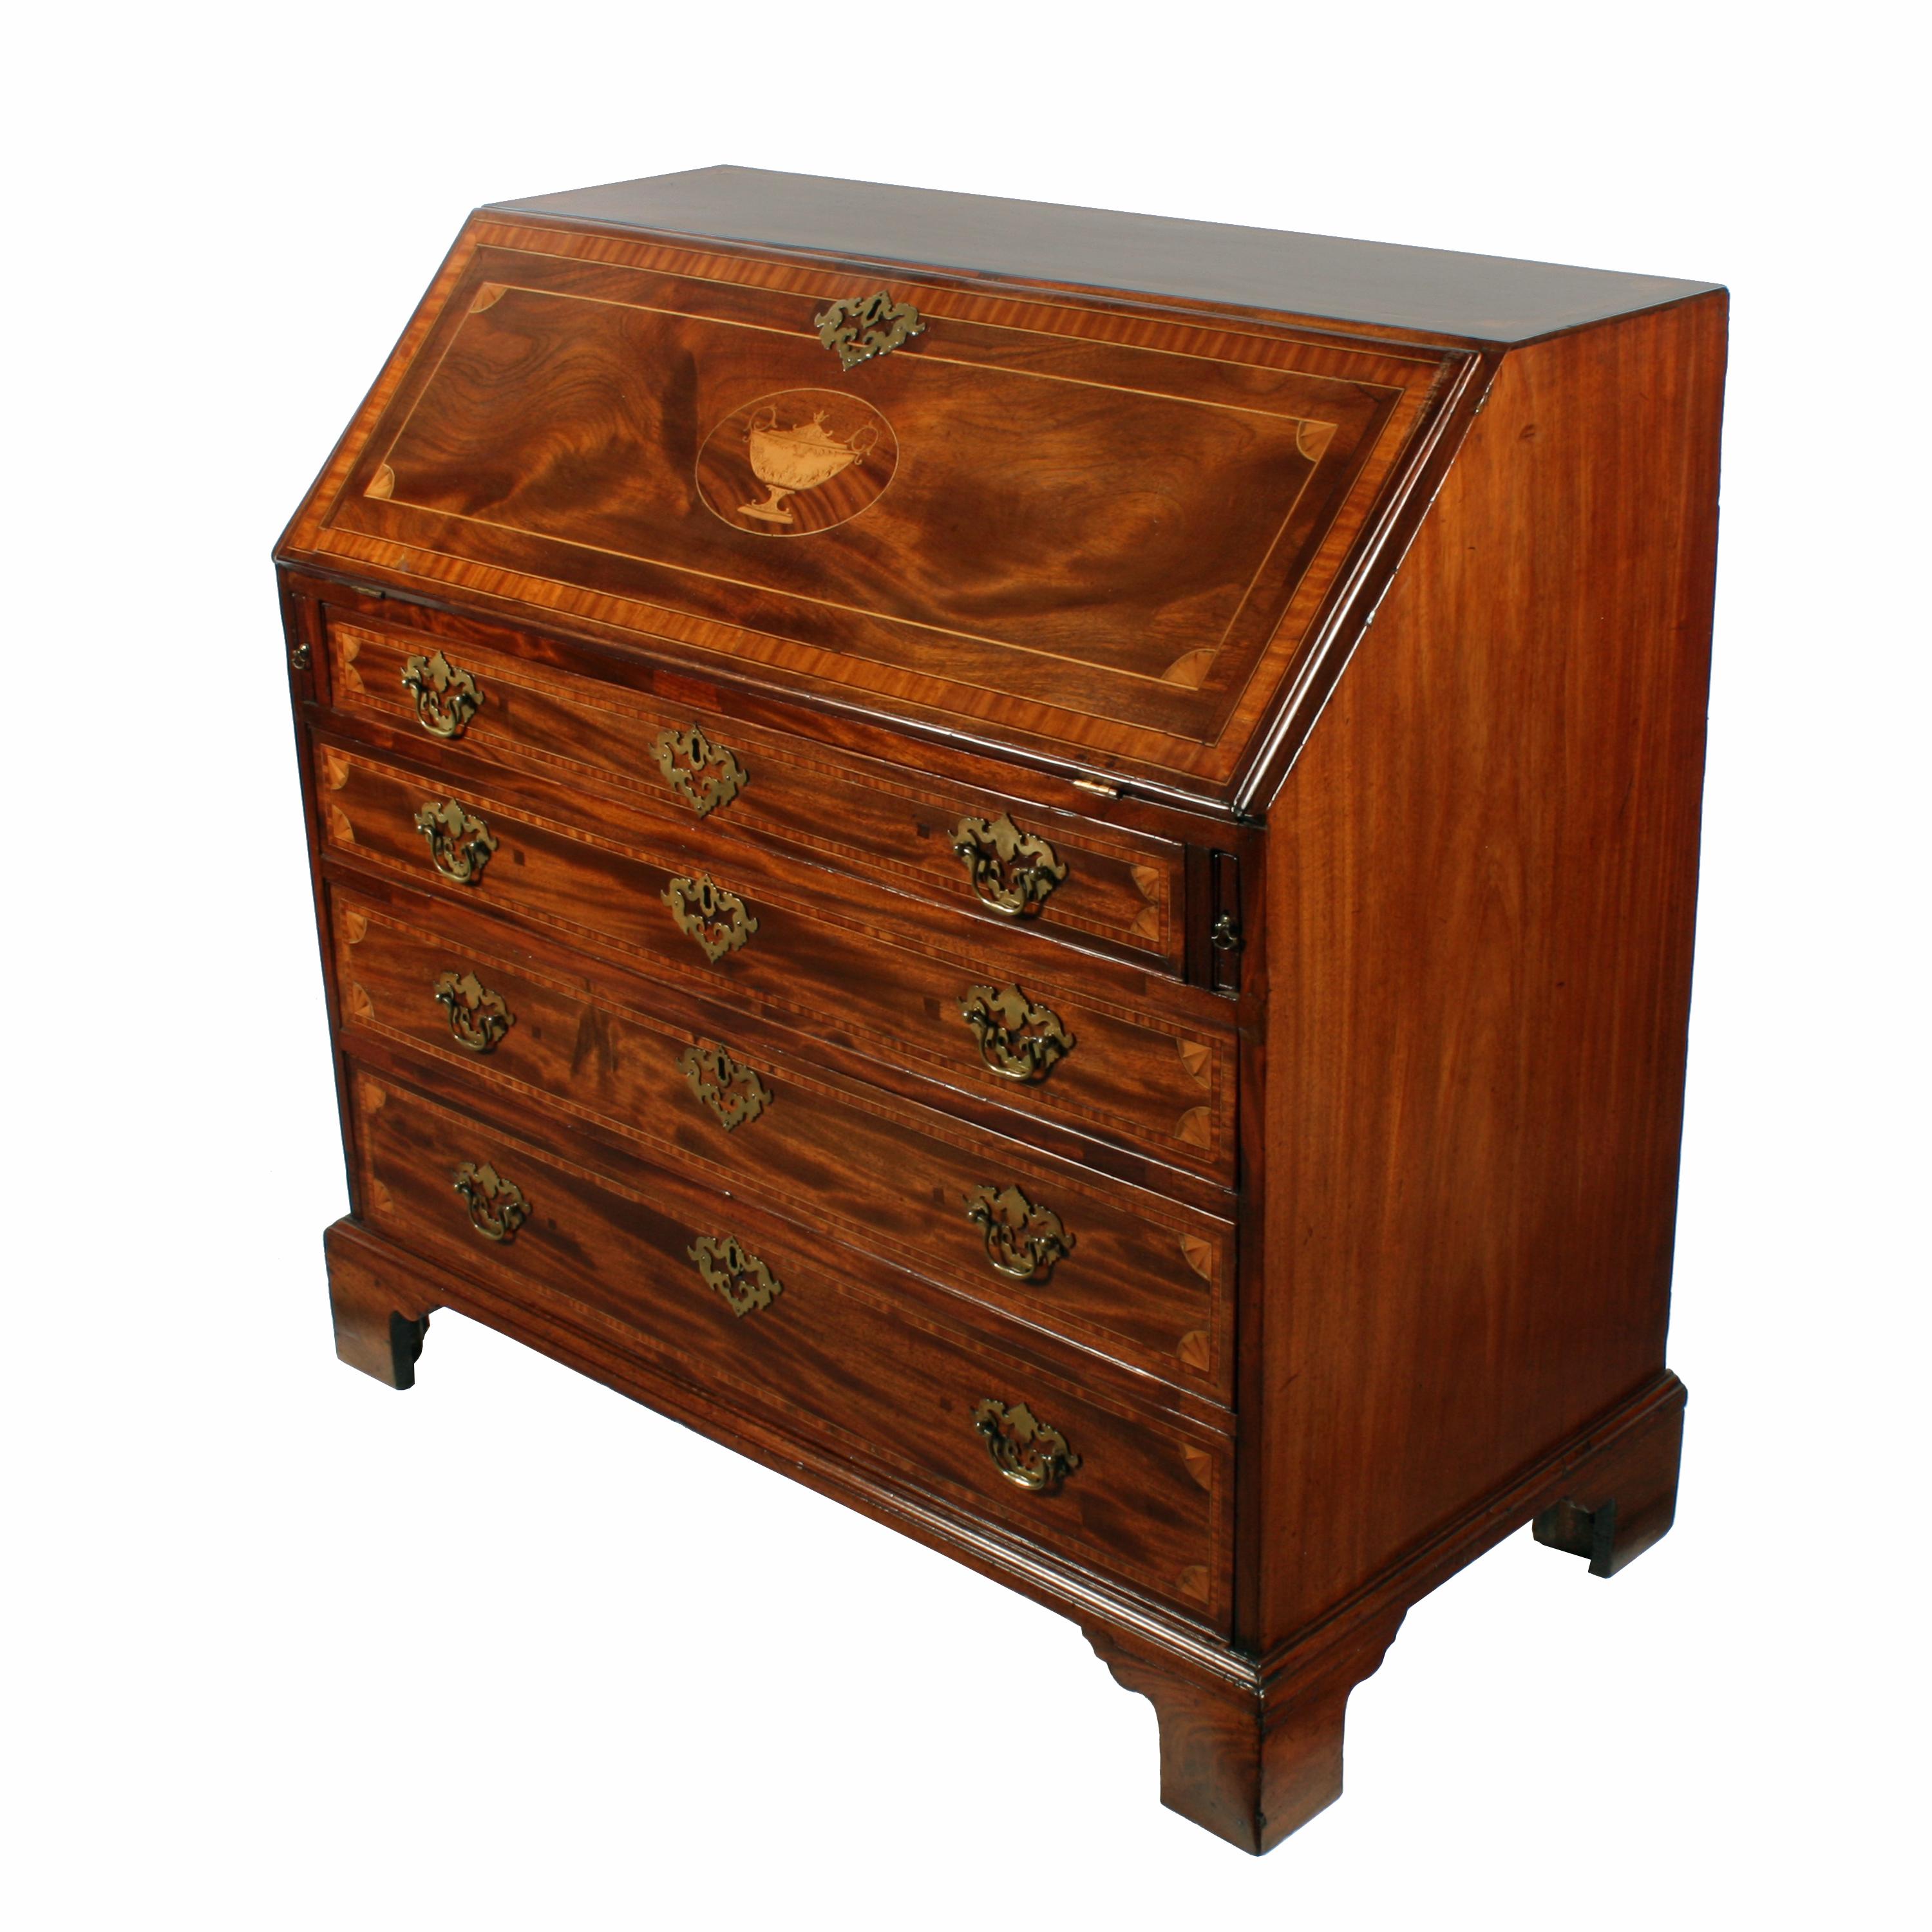 A late 18th-early 19th century Georgian mahogany bureau with later marquetry, satinwood and box wood inlays.

The bureau has four graduated oak lined drawers that have pierced brass handles which are not original.

The drawer fronts are